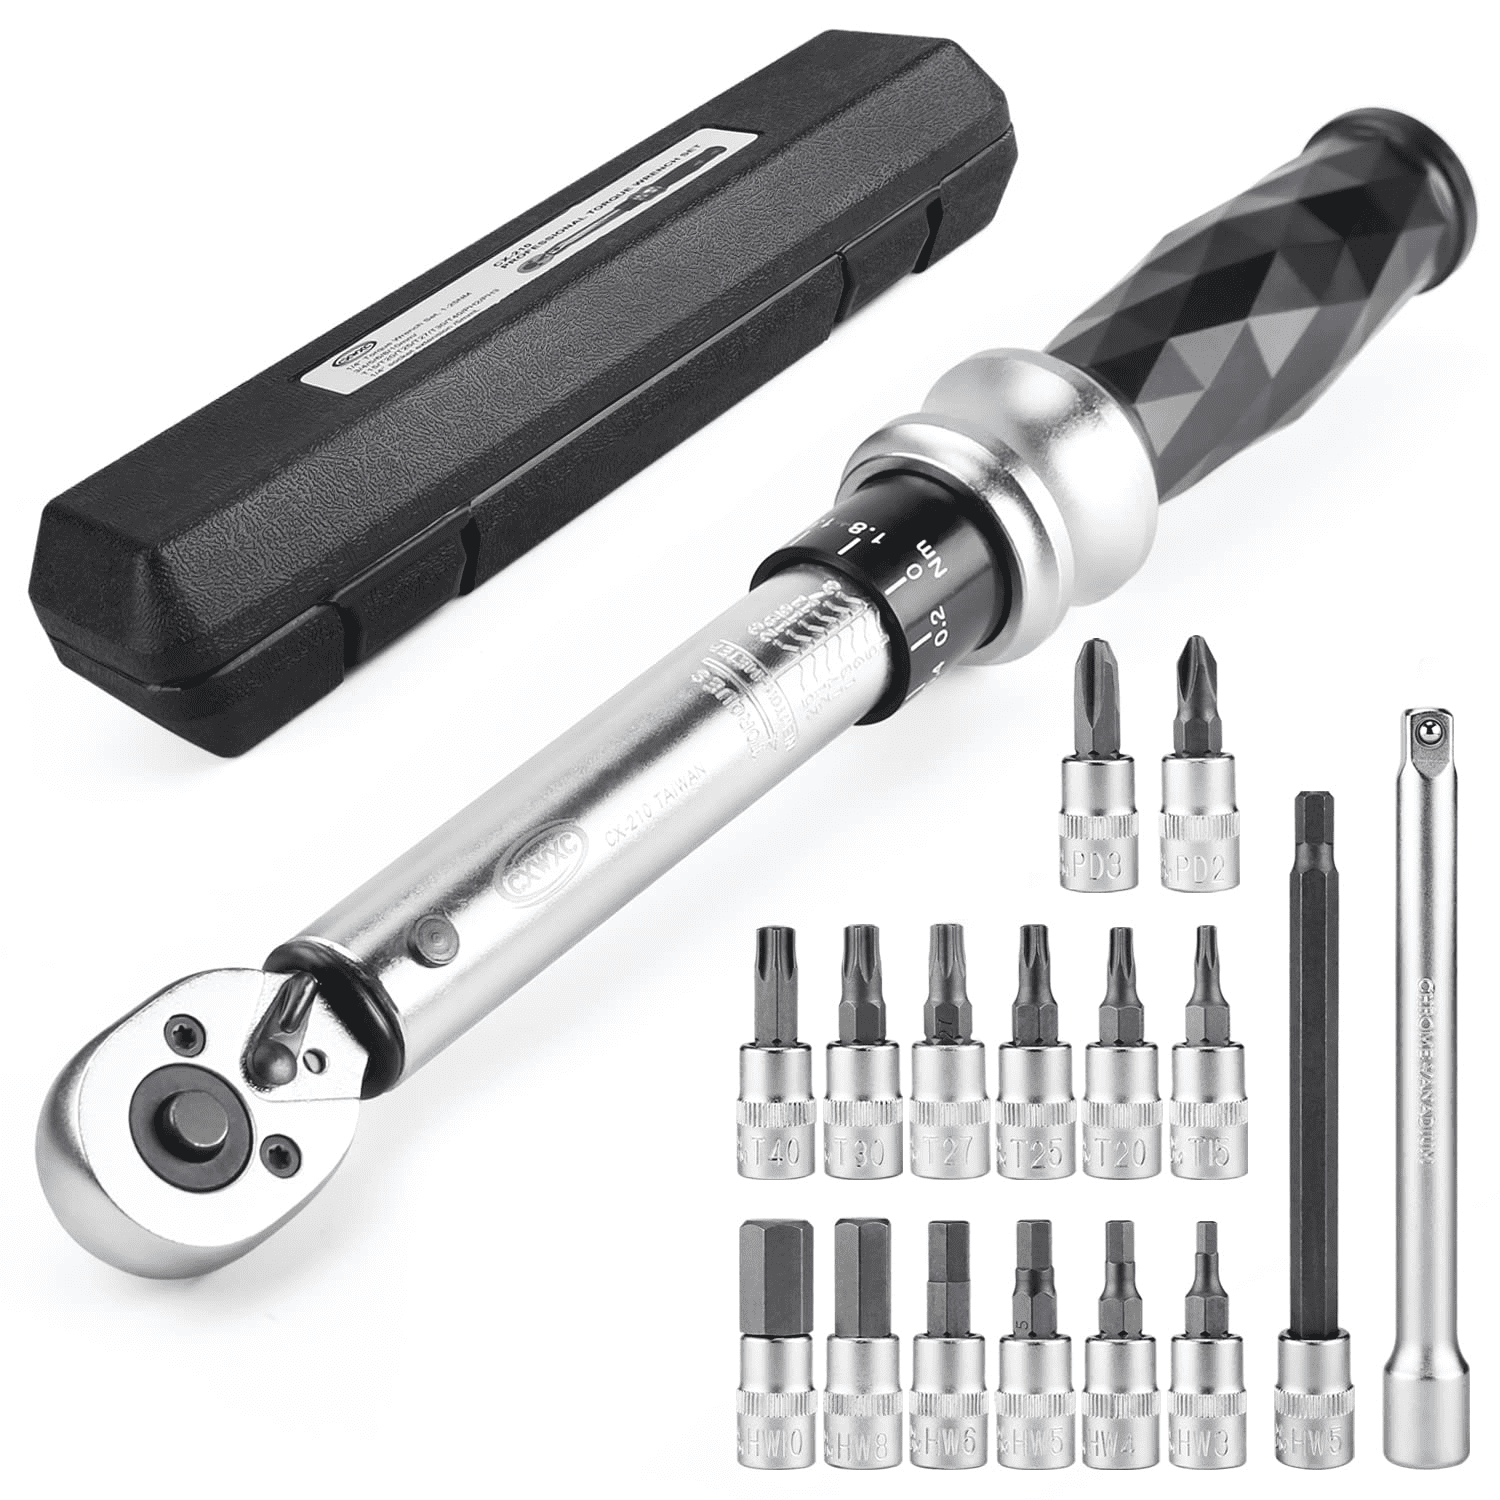 T25 SUNLITE MINI TORQUE WRENCH BICYCLE TOOL--3 6mm T20 5 4 